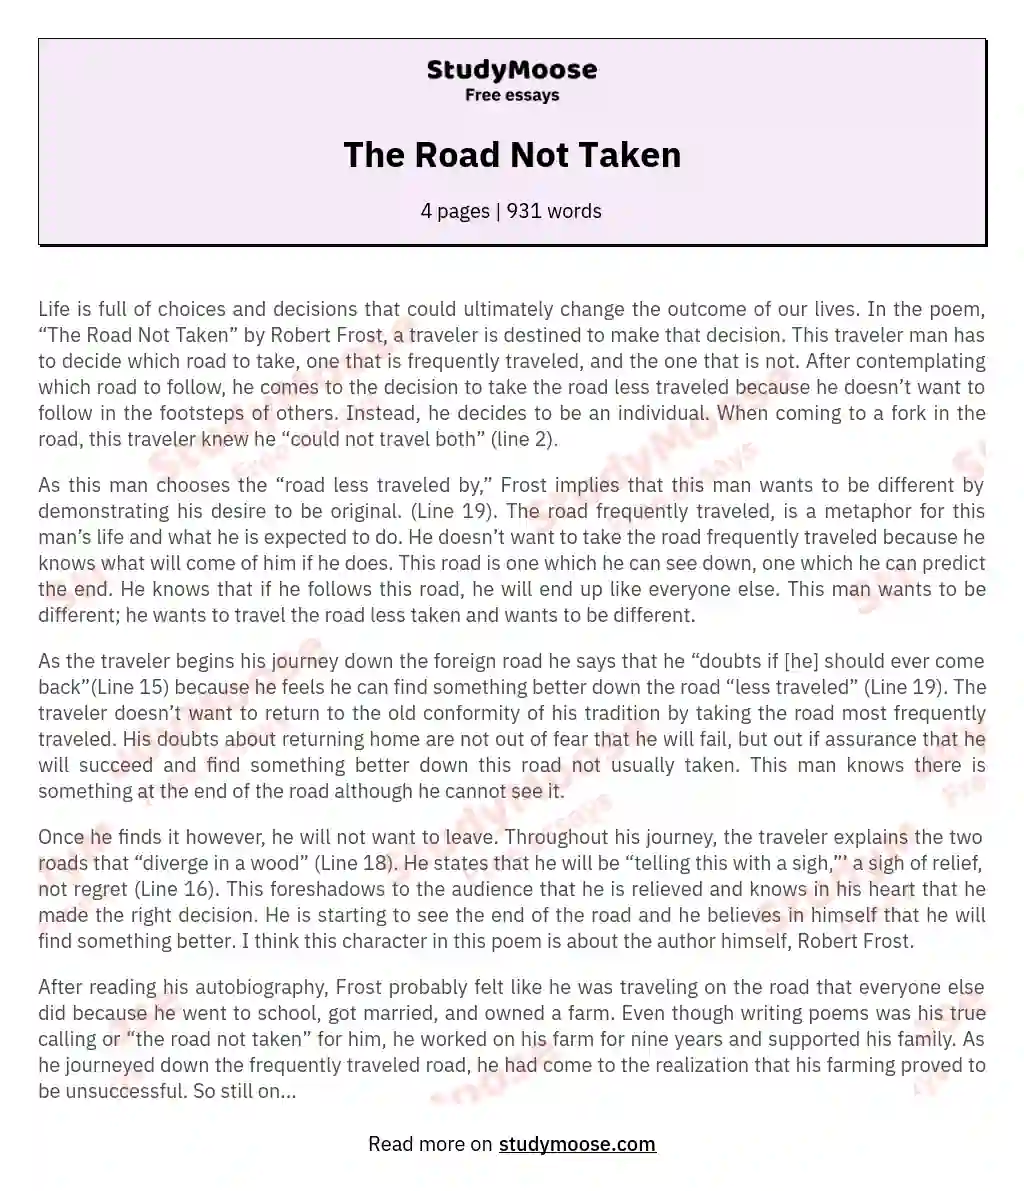 essay of the poem the road not taken